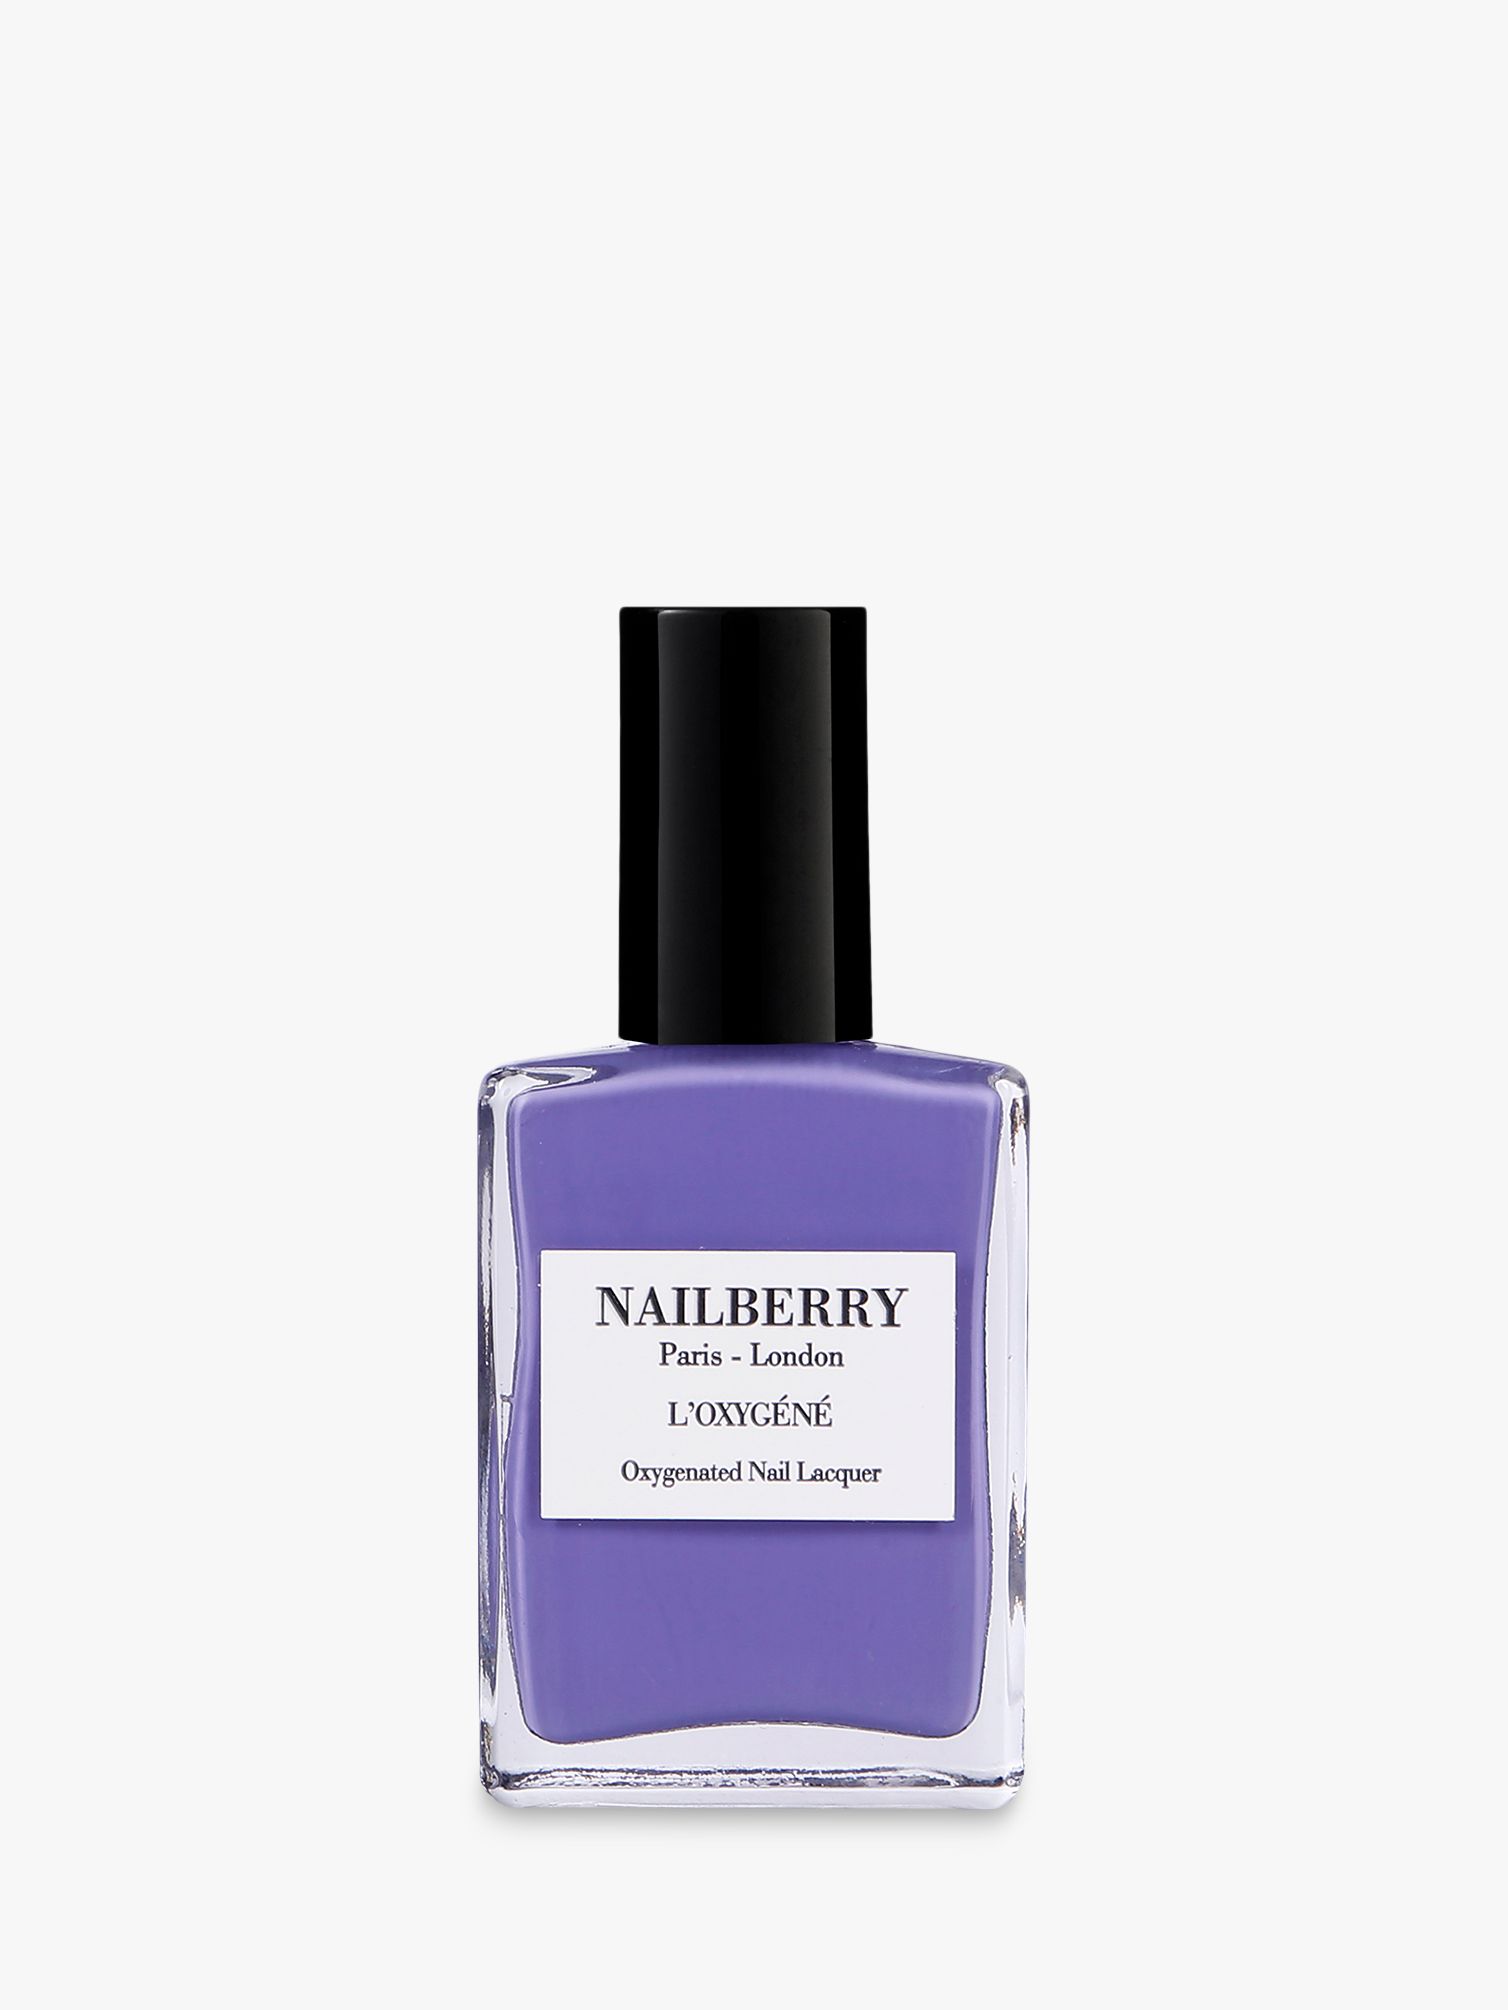 Nailberry L'Oxygéné Oxygenated Nail Lacquer